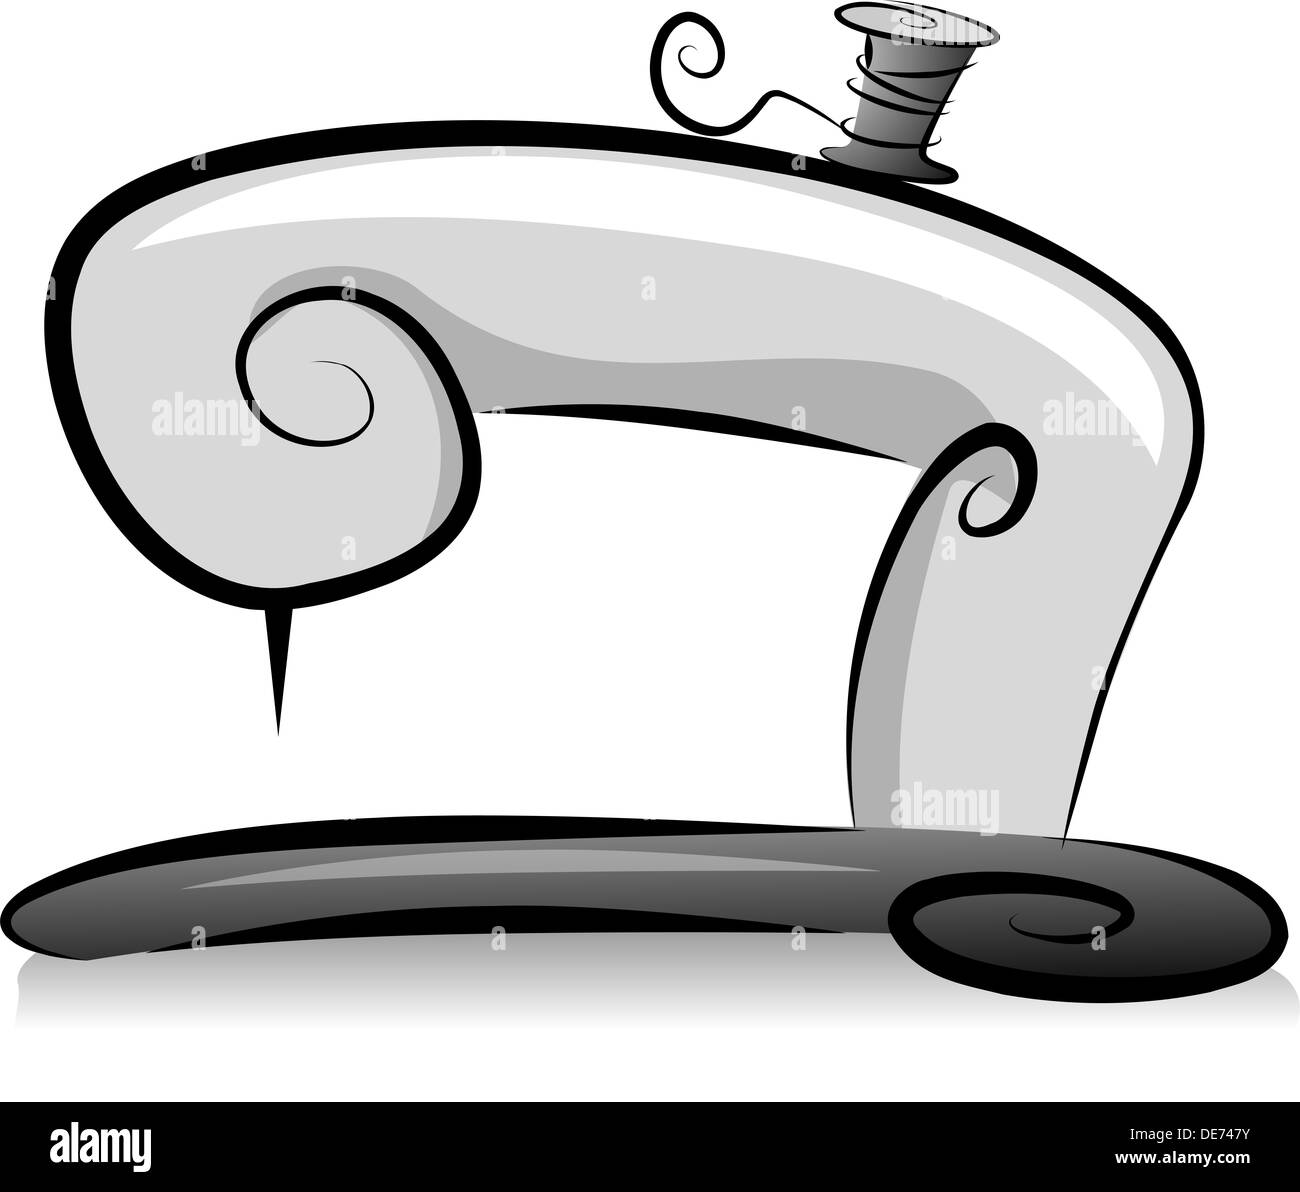 Illustration of Sewing Machine with a Spool of Thread in Black and White Stock Photo